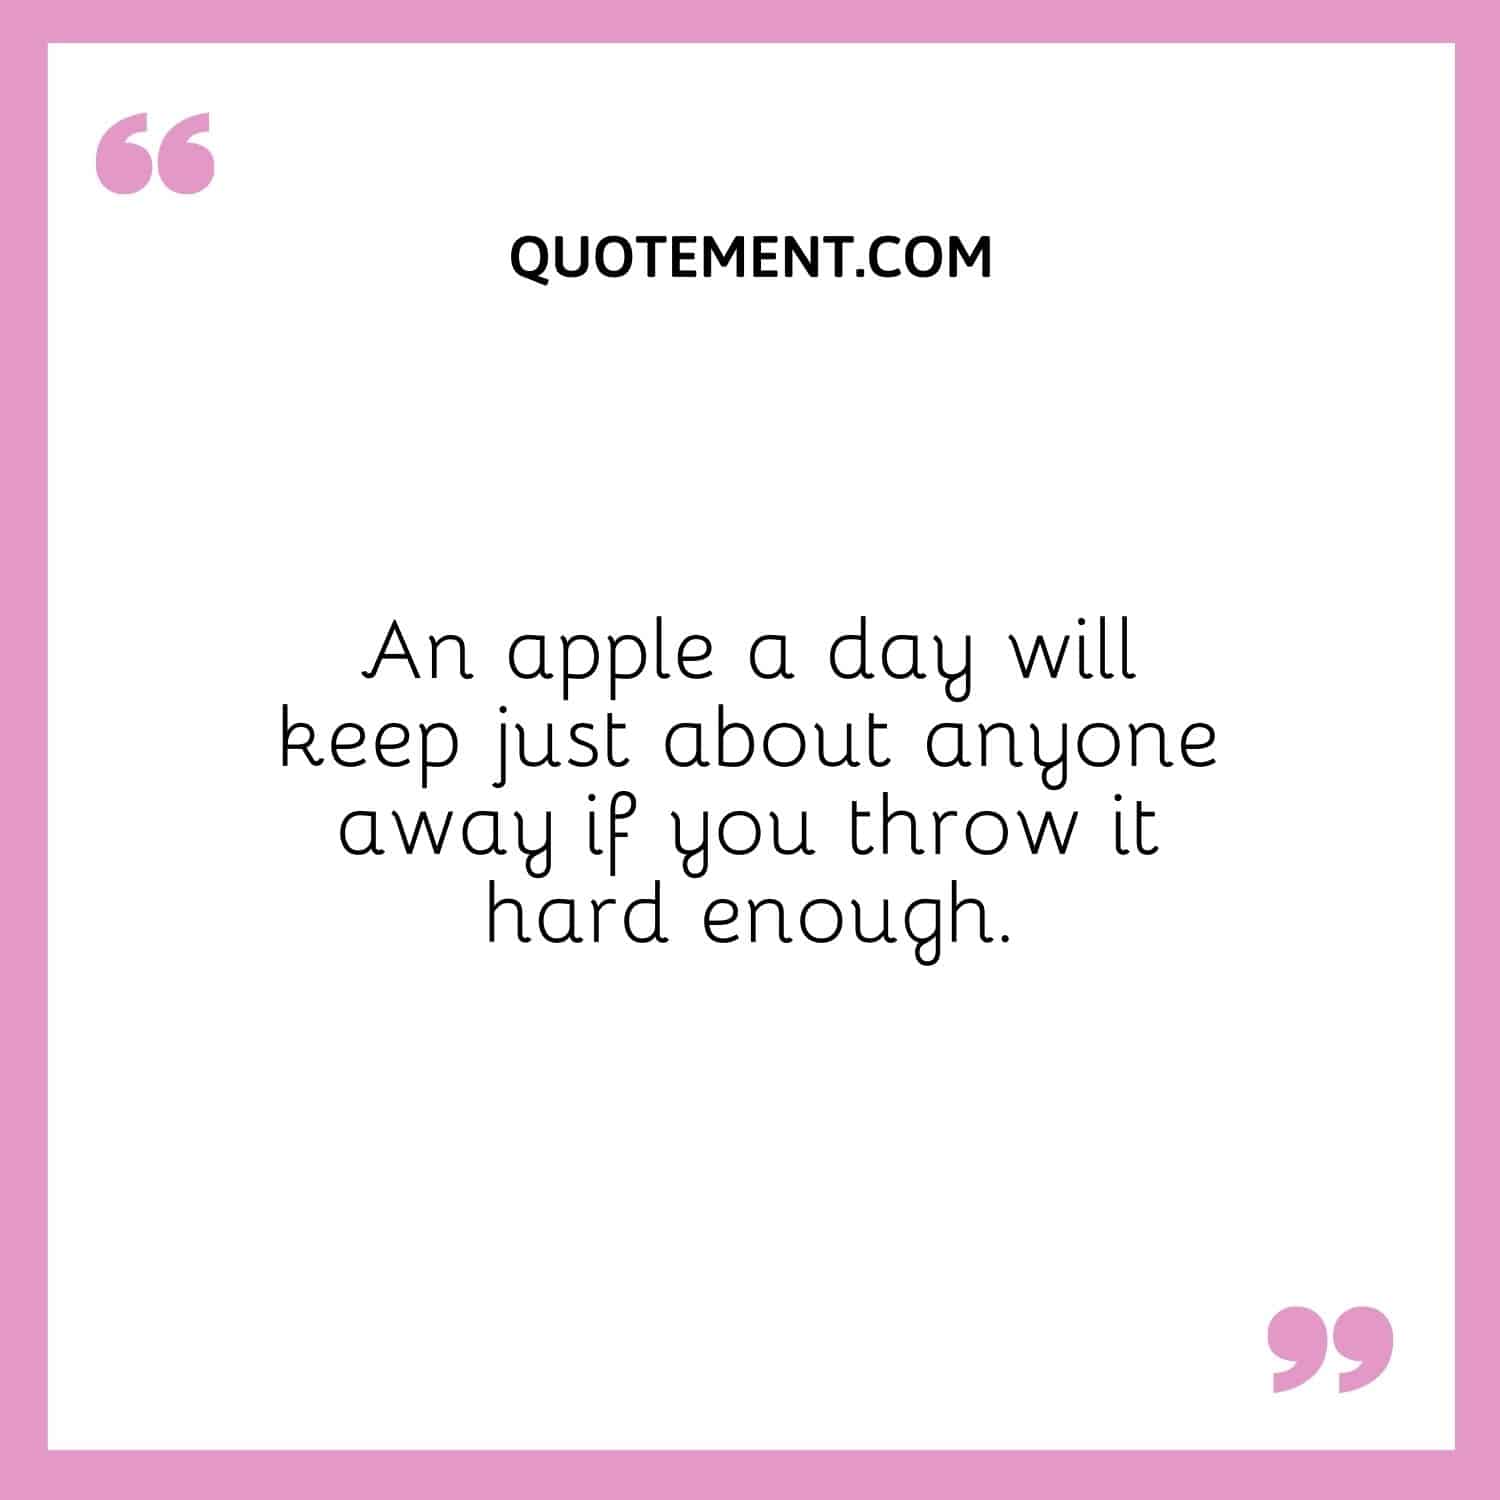 An apple a day will keep just about anyone away if you throw it hard enough.